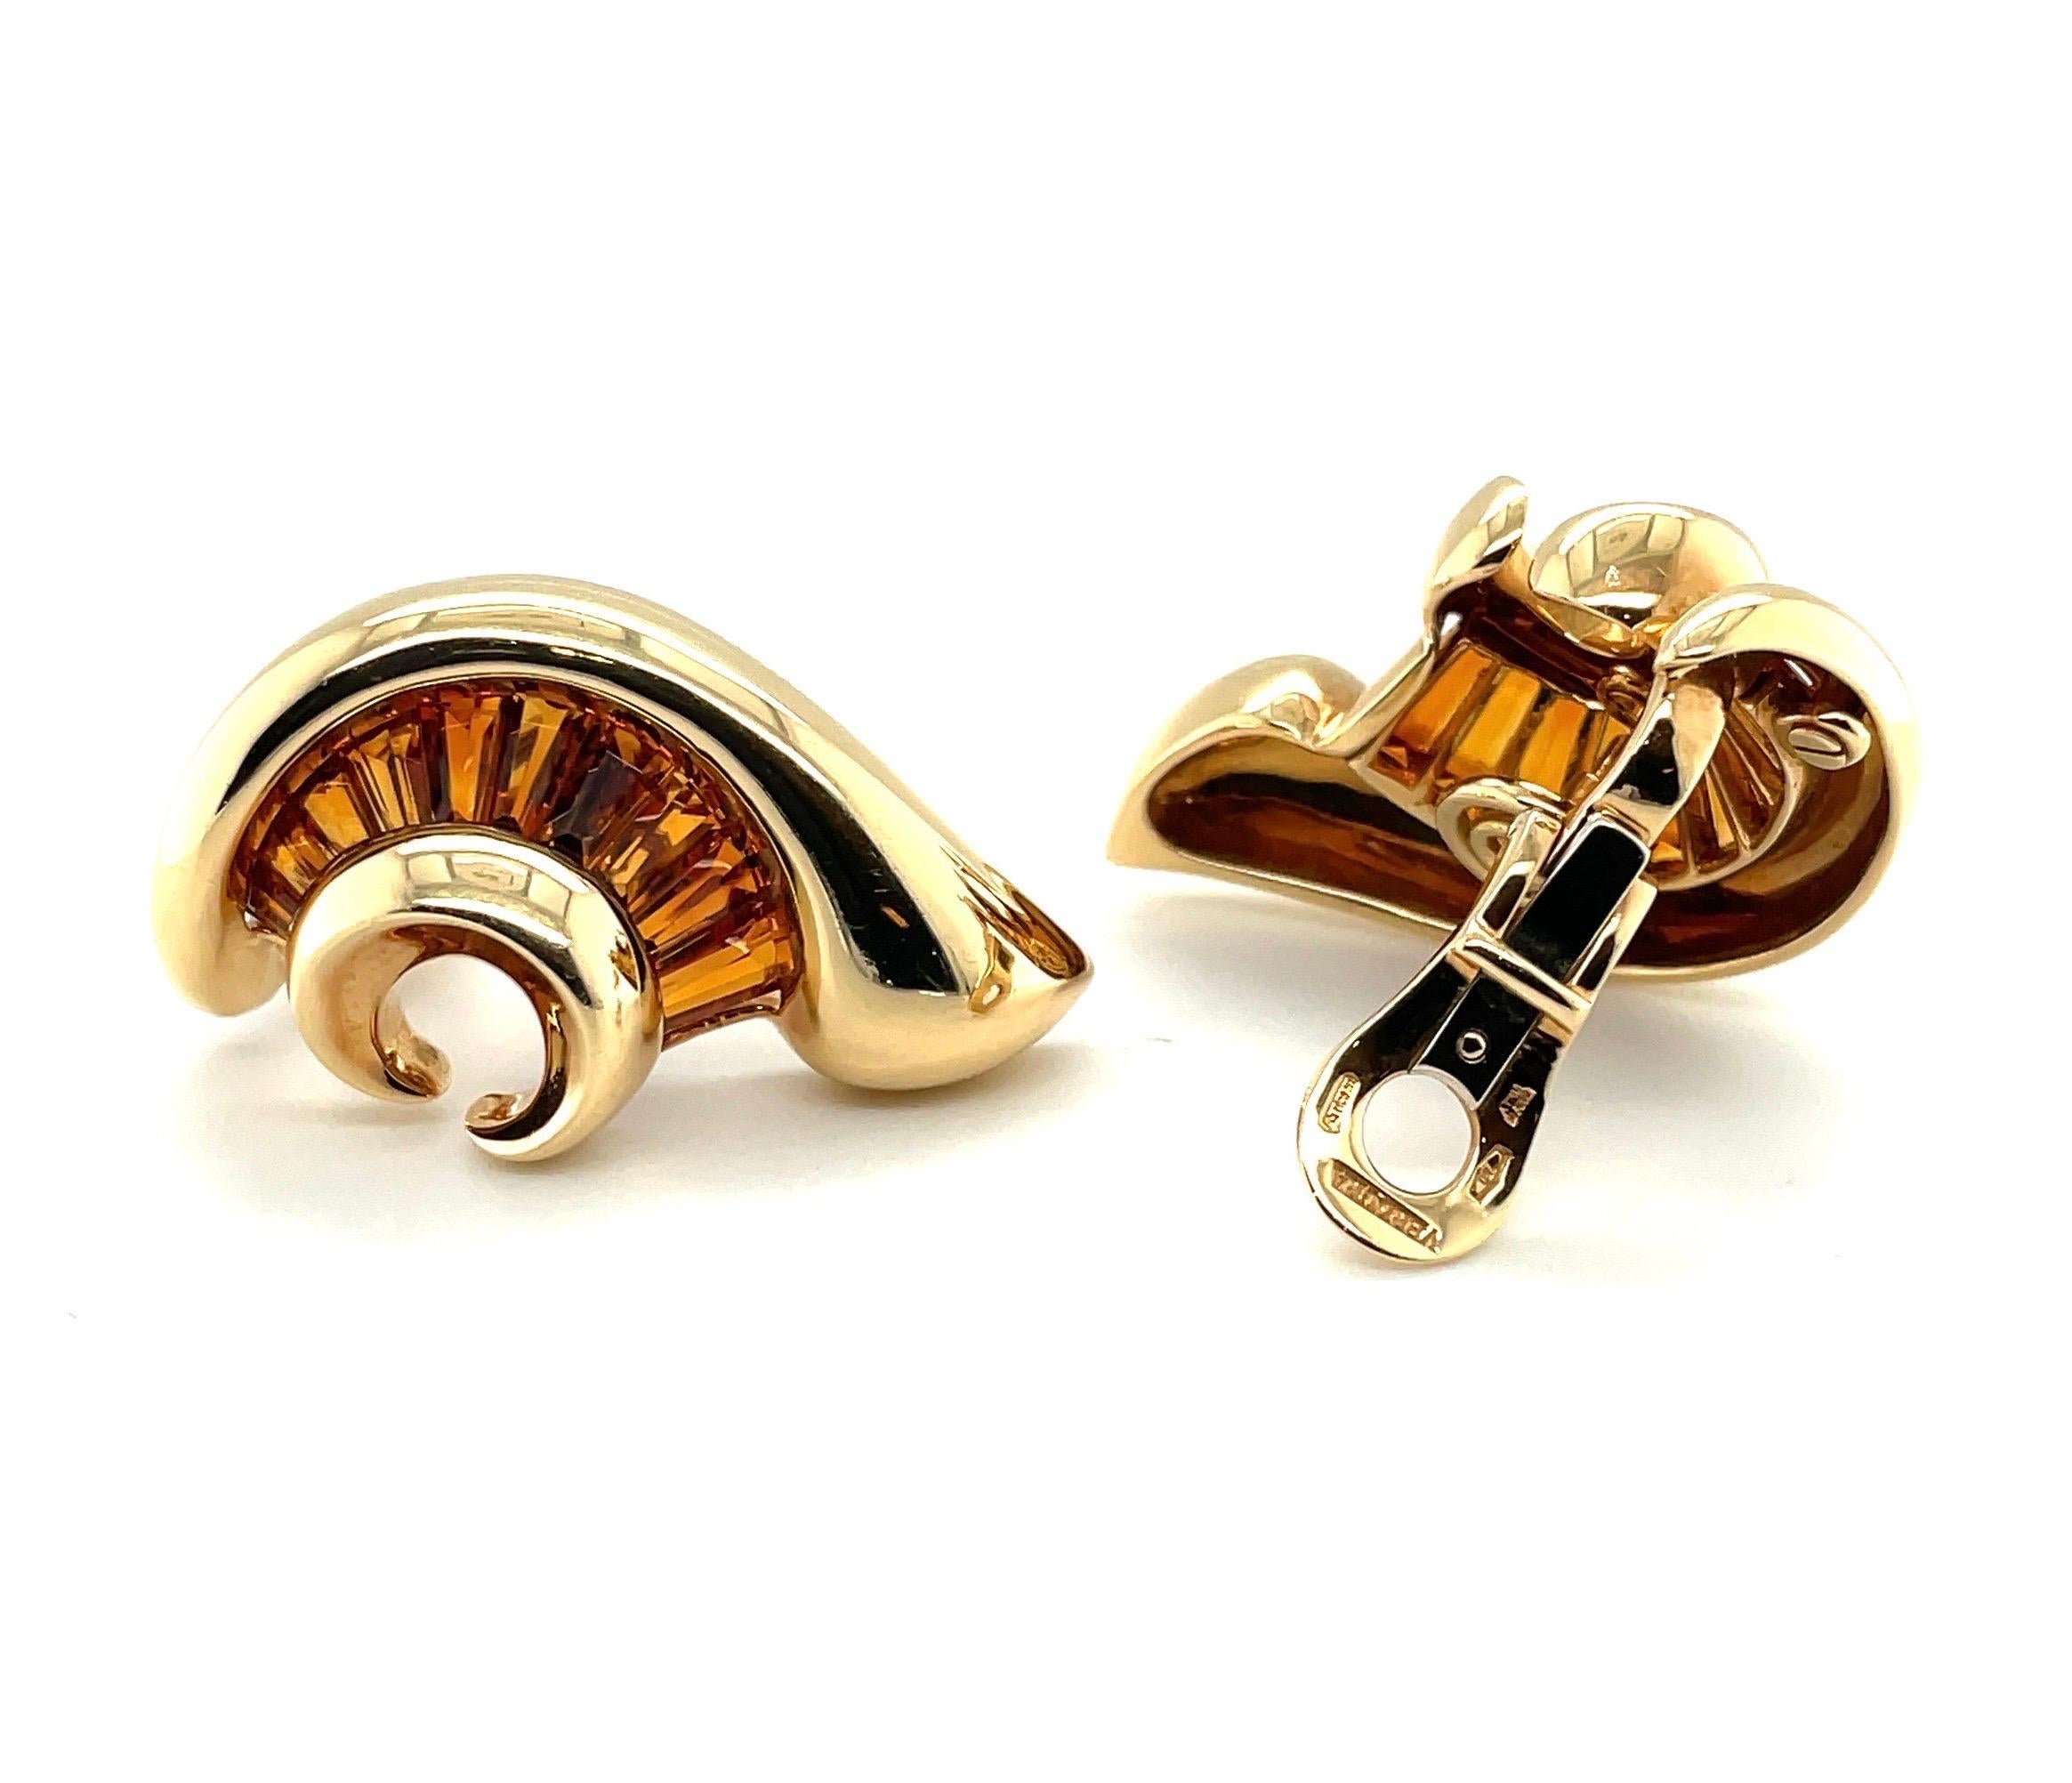 Stylish pair of 18 karat yellow gold and citrine ear clips by Verdura. 

Eye-catching 18 karat yellow gold ear clips of slightly bombé design, each in form of a stylised shell and decorated with 10 calibré-cut, trapeze-shaped citrines. These